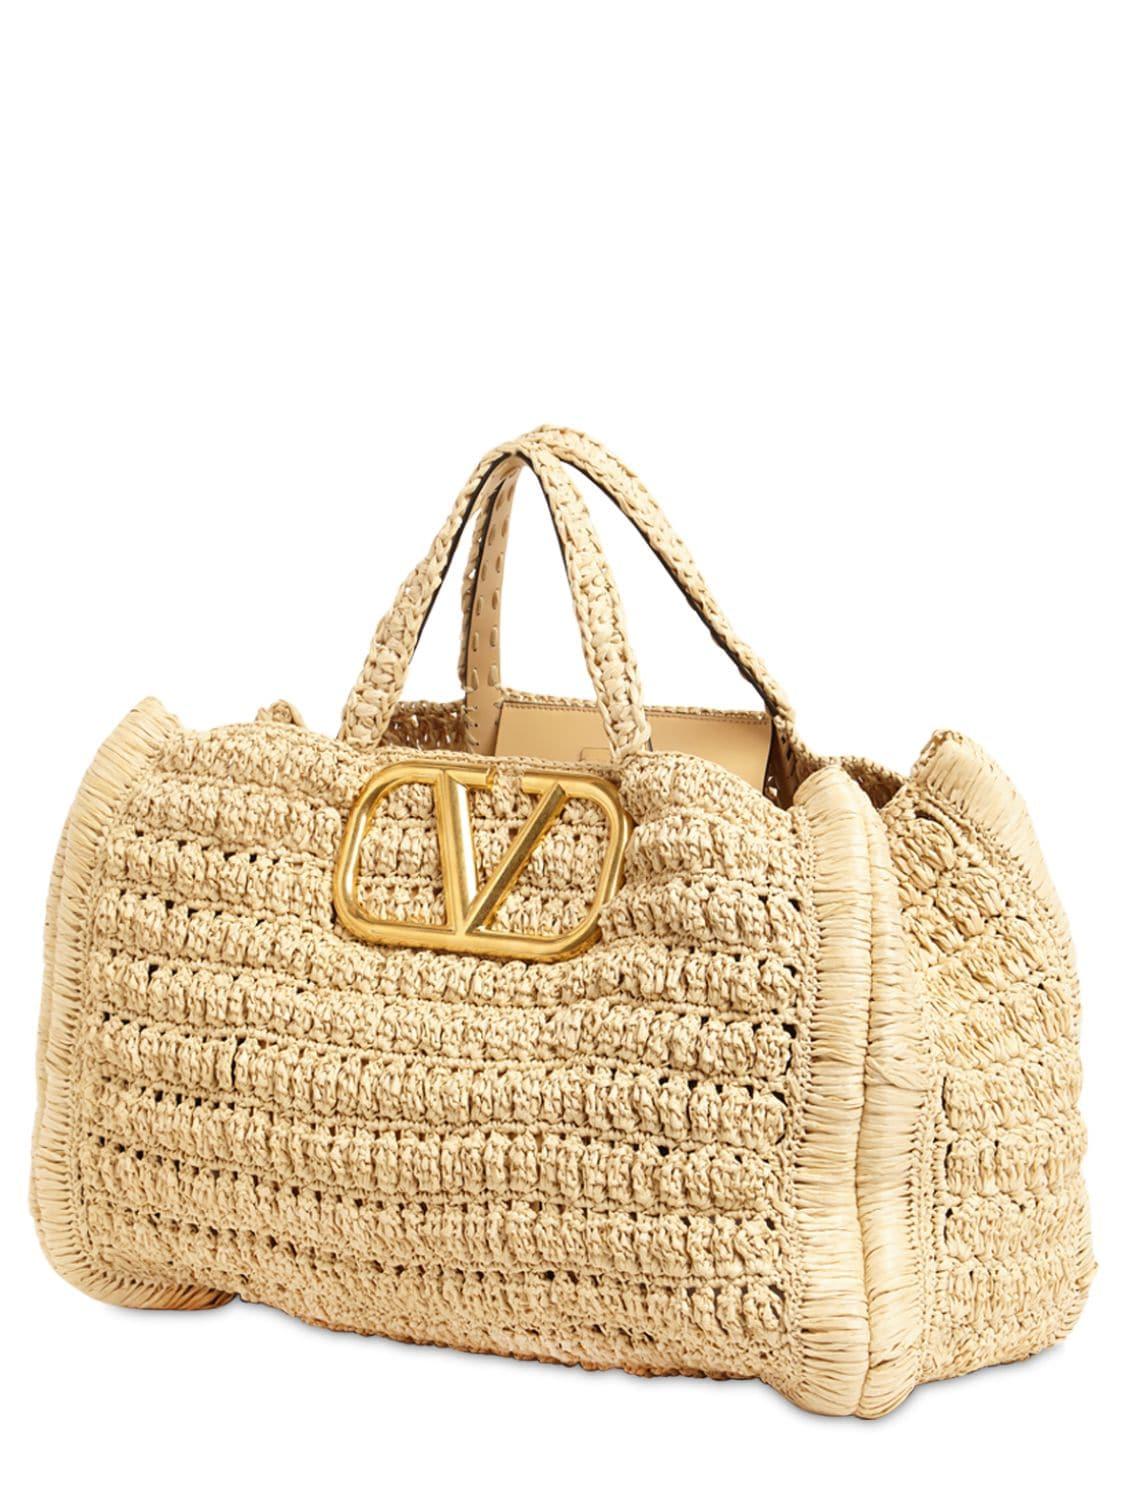 Valentino In.it Crochet Tote Bag in Natural - Lyst